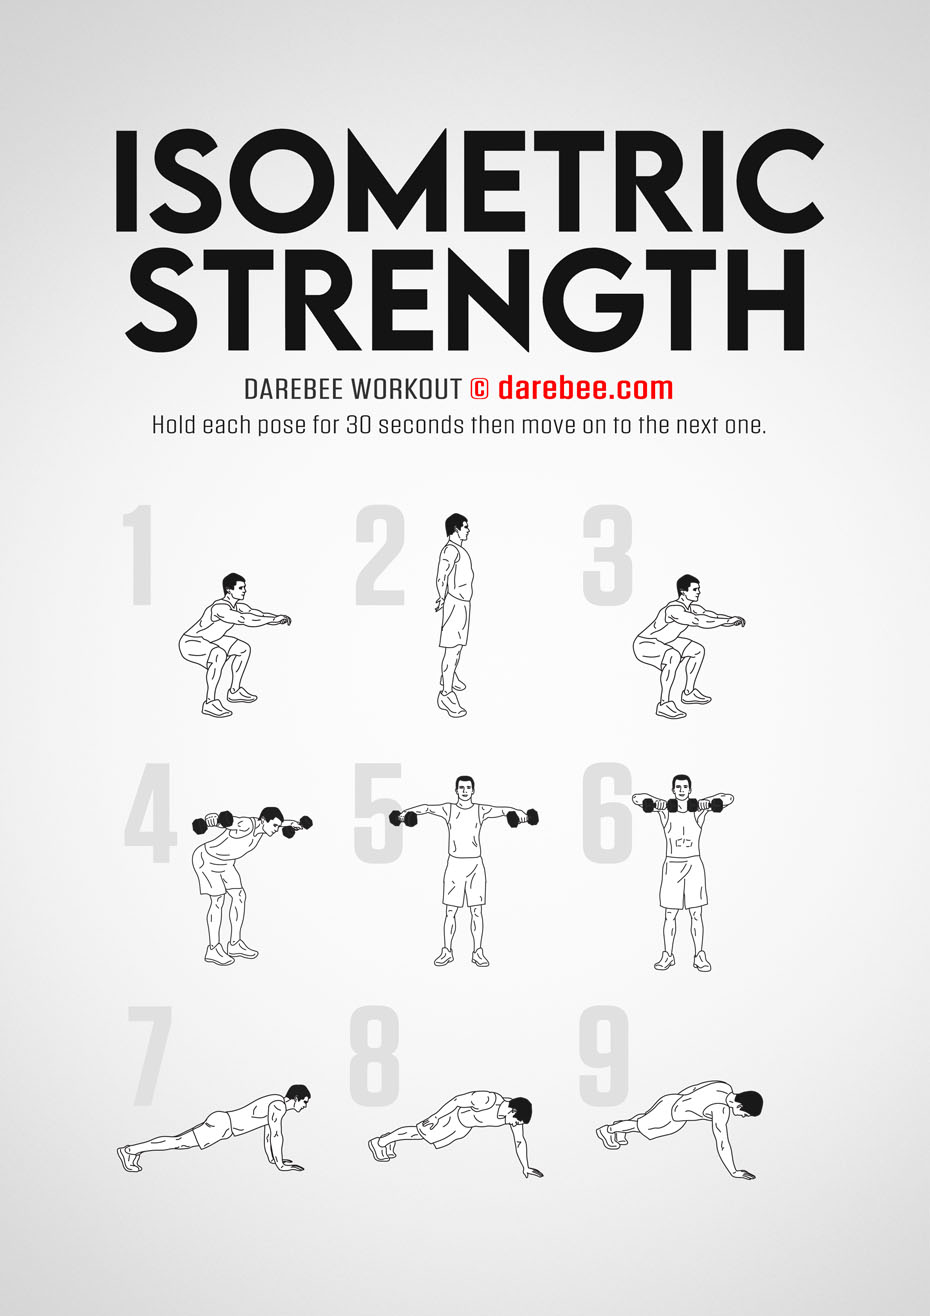 Isometric Strength is a Darebee home-fitness isometric strength workout that does exactly what it says it does. 